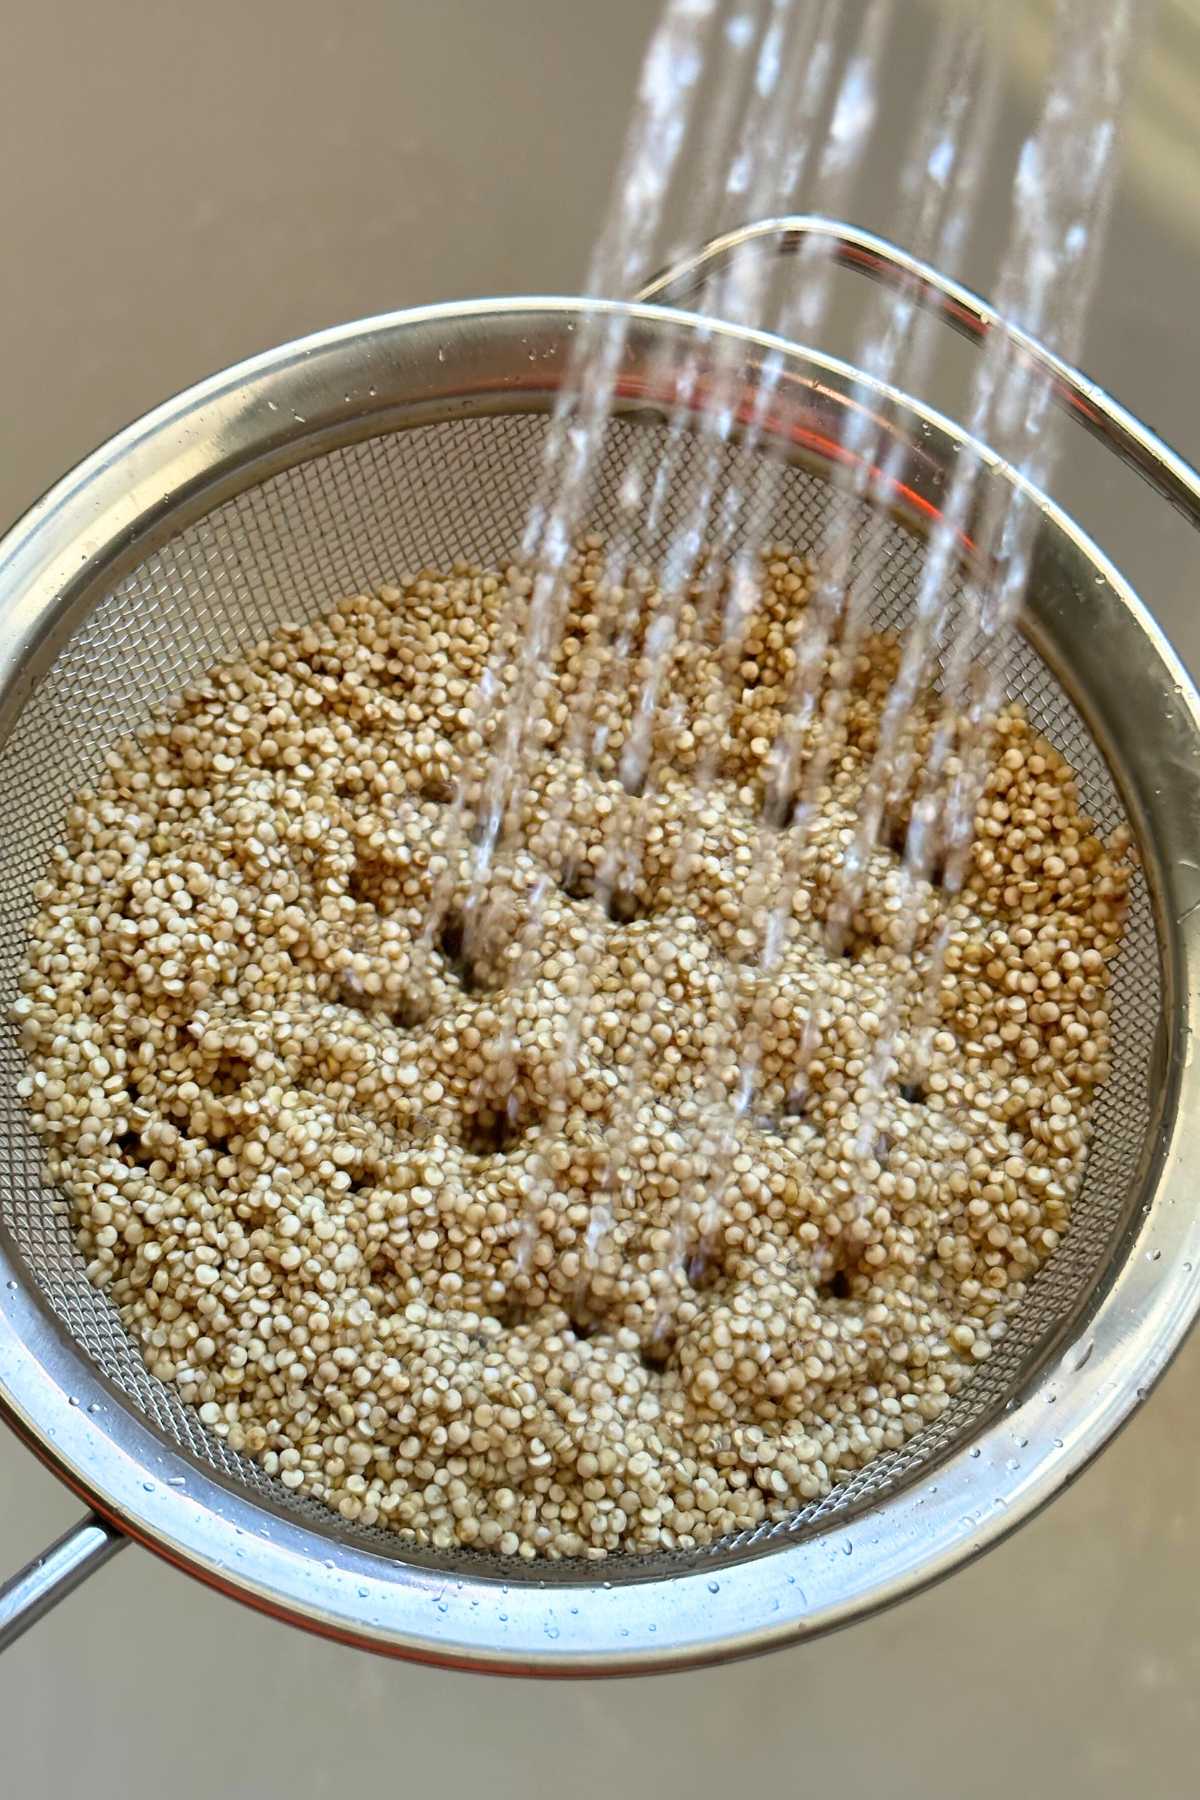 Rinsing quinoa in a fine mesh strainer with water.